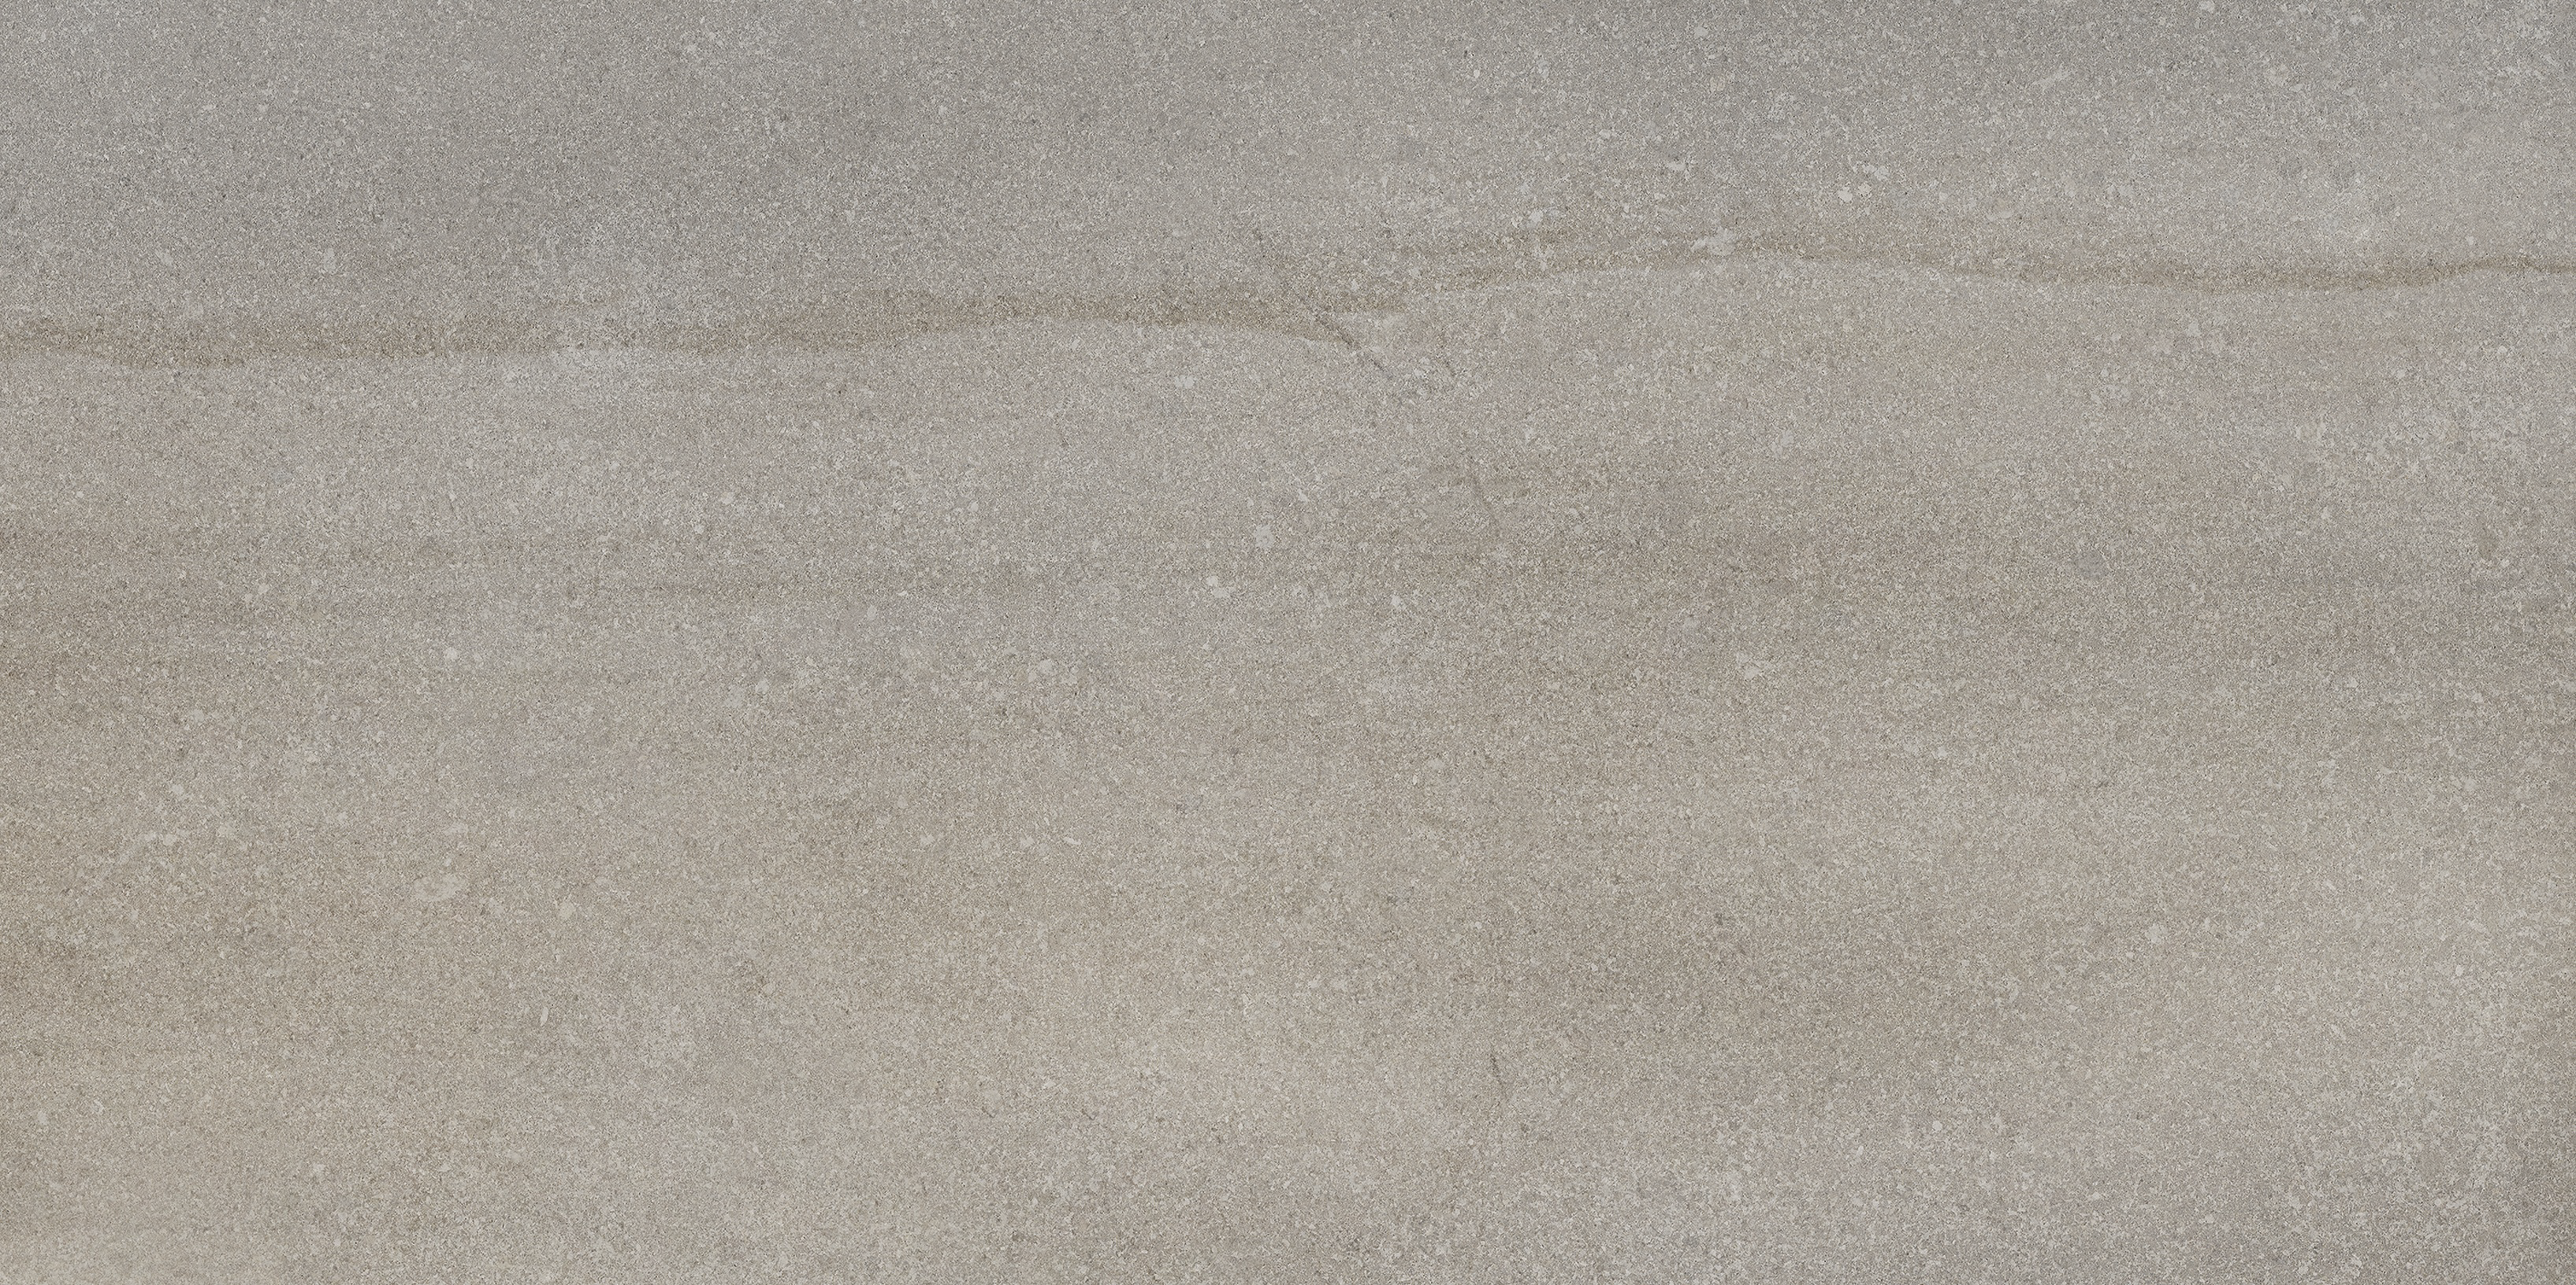 ash pattern glazed porcelain field tile from crux anatolia collection distributed by surface group international matte finish pressed edge 12x24 rectangle shape